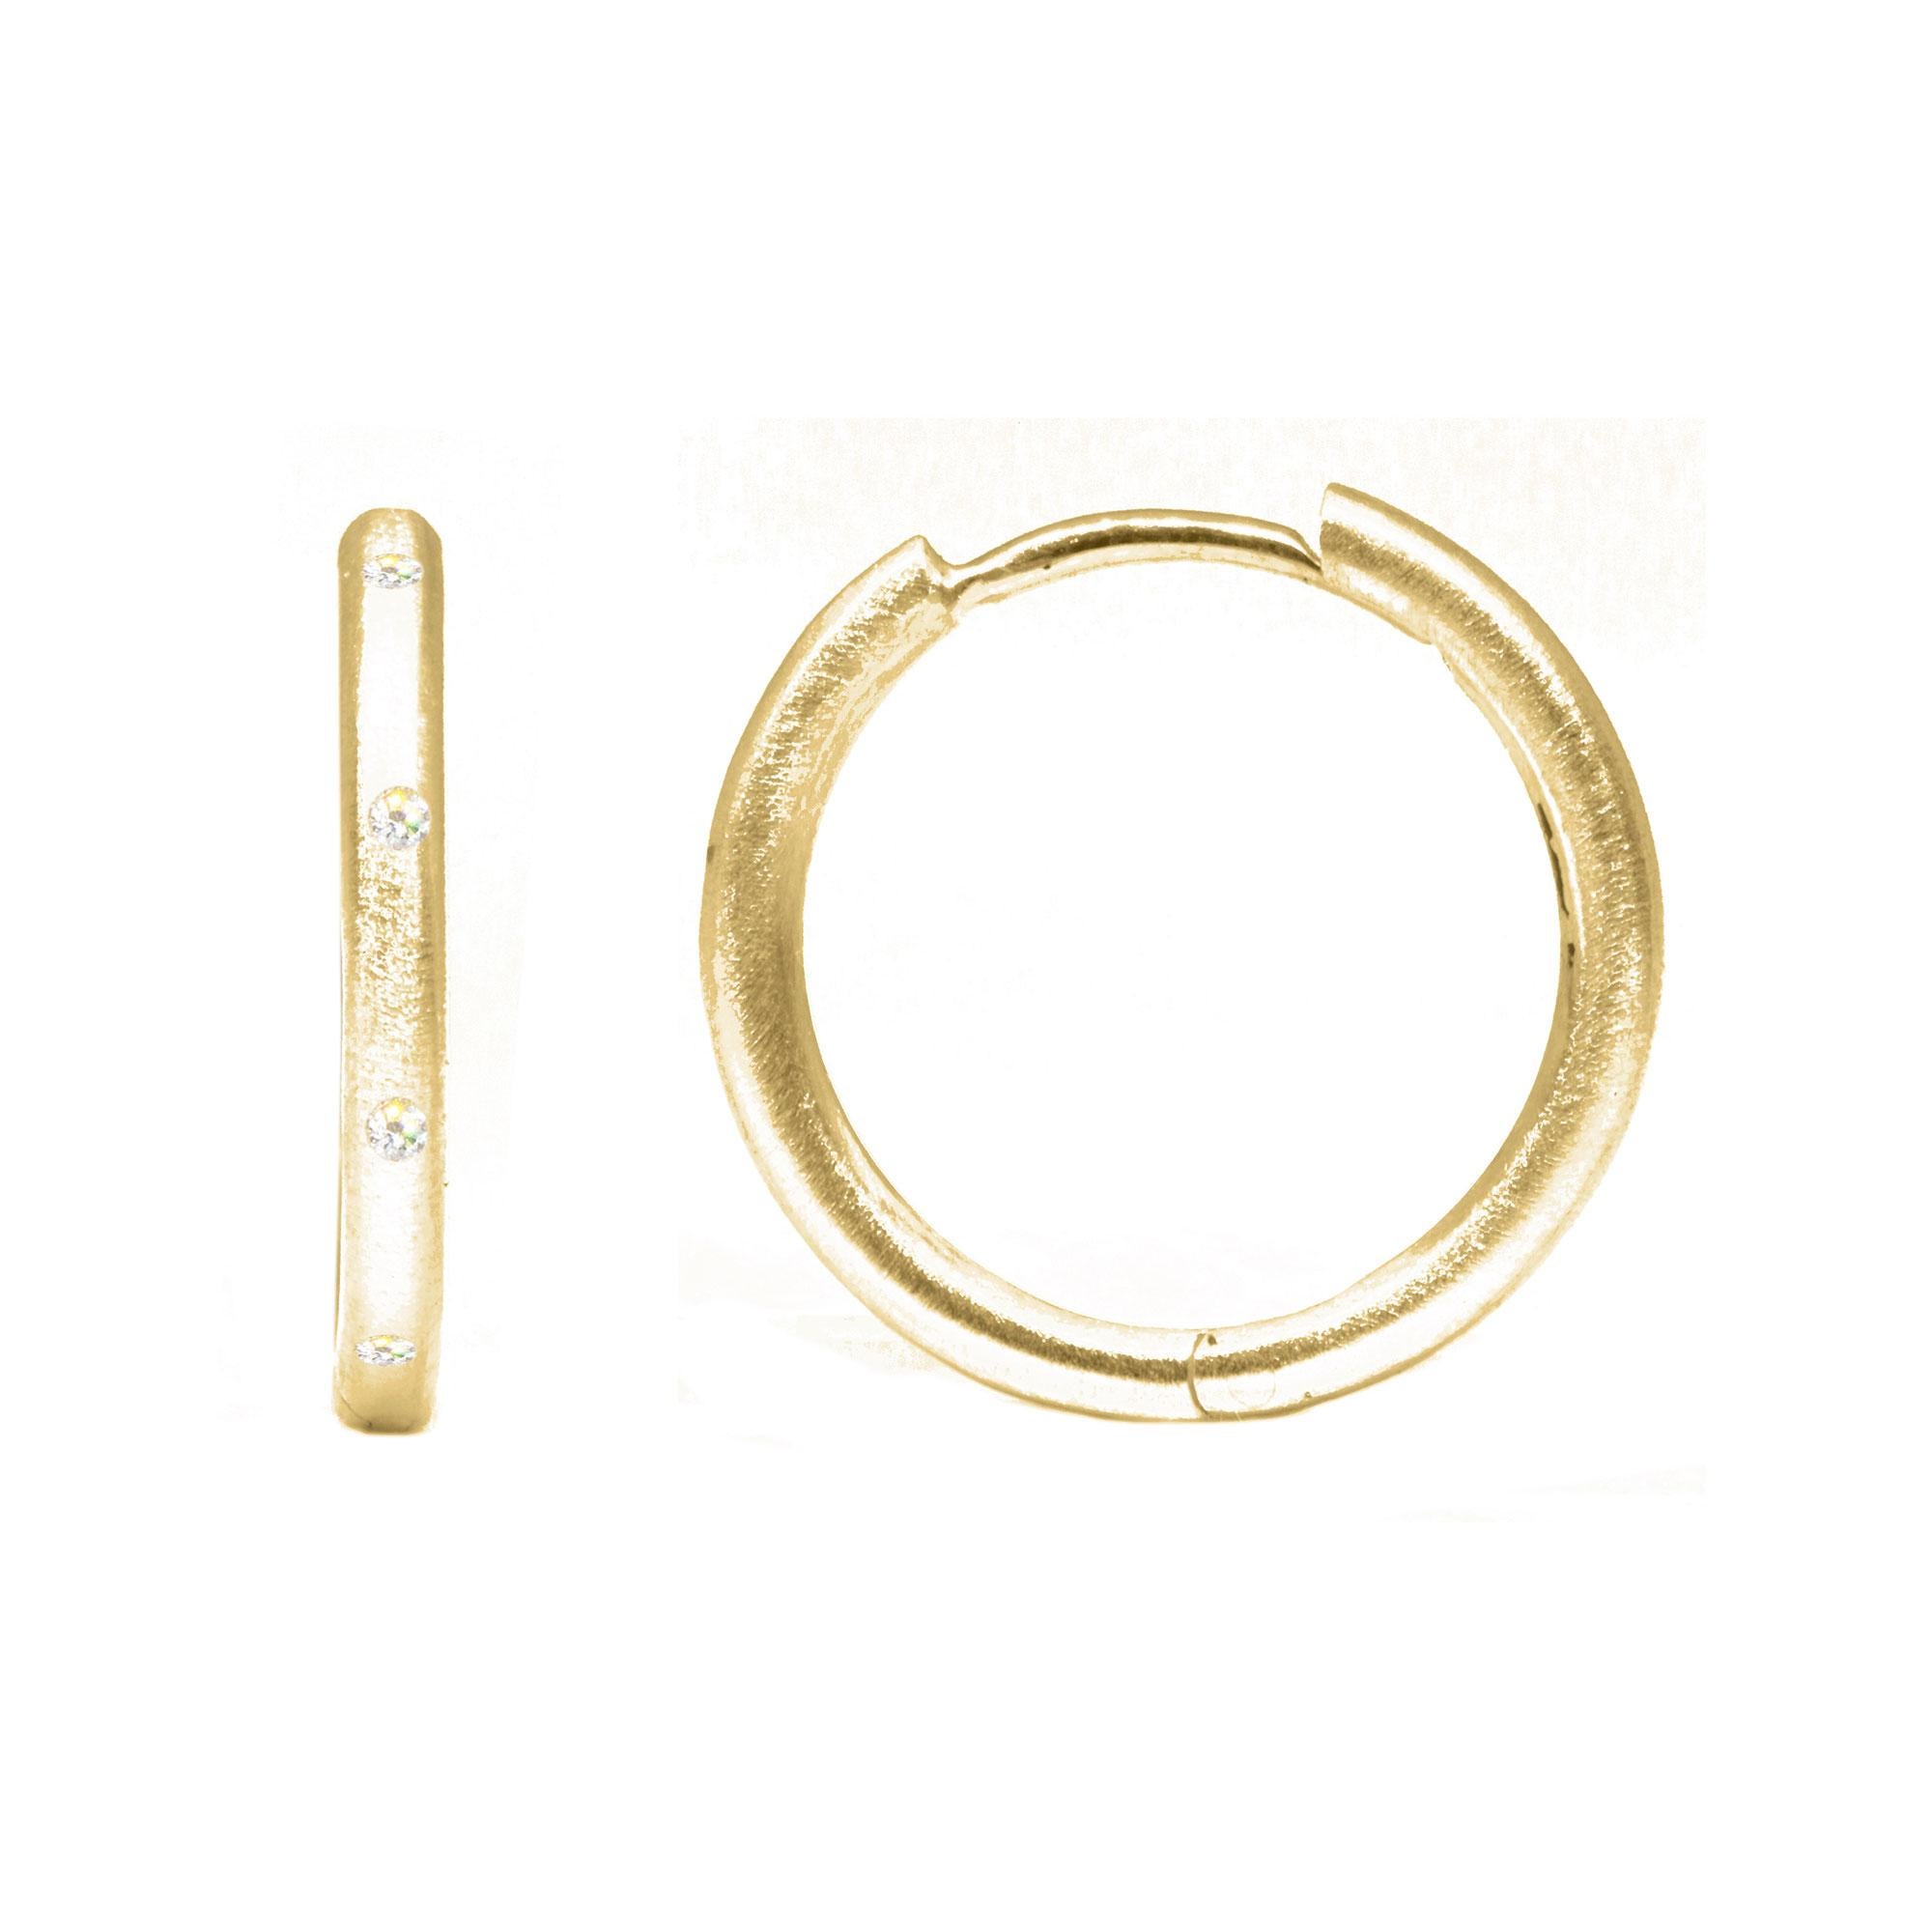 Pair the Ellie 18mm 18K Gold Hoops feature responsibly-sourced diamond accents. Paired with your choice of gemstone charms, they complement any ensemble while showcasing subtle elegance.

Details
Metal: 18K Rose Gold
Diamond carat: 0.25
Hoops Size: